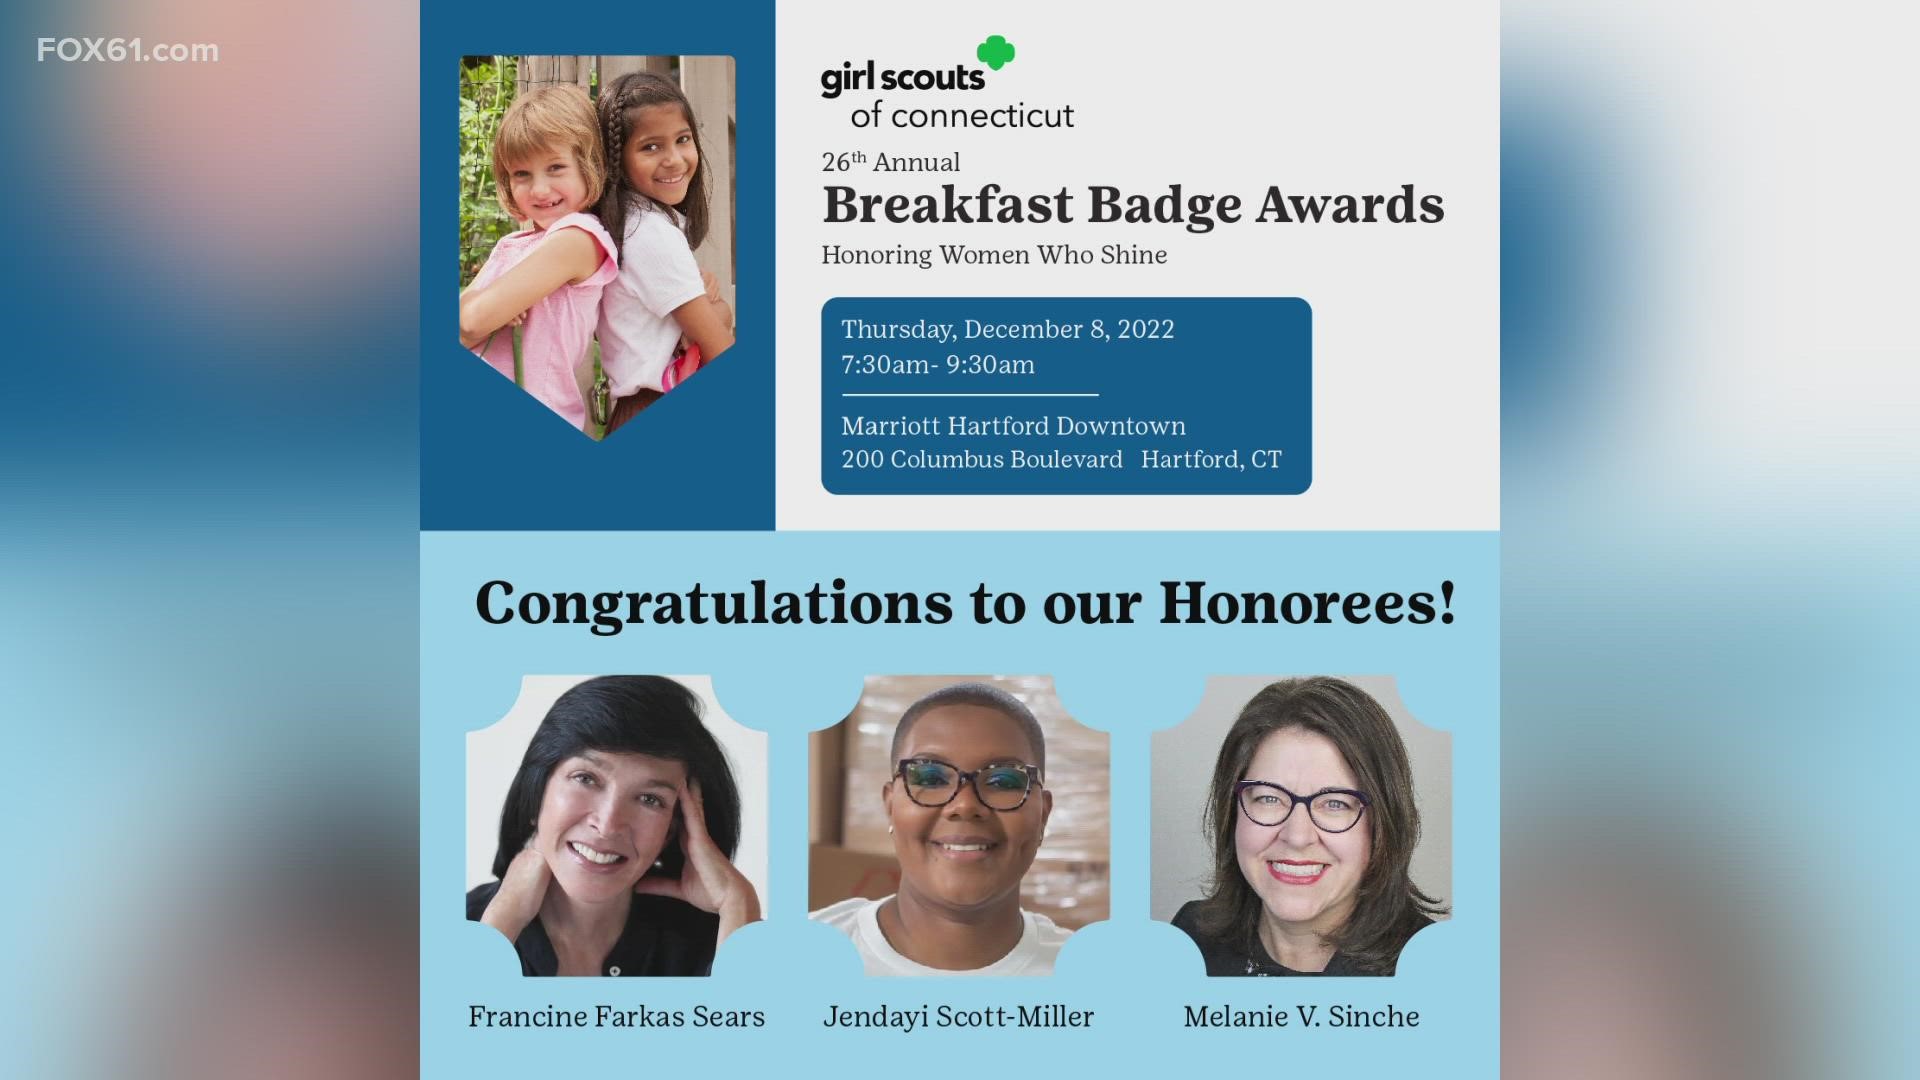 Jendayi Scott-Miller is the founder and CEO of Angel of Edgewood and she's recognized by Girl Scouts of Connecticut with its annual Breakfast Badge Award.